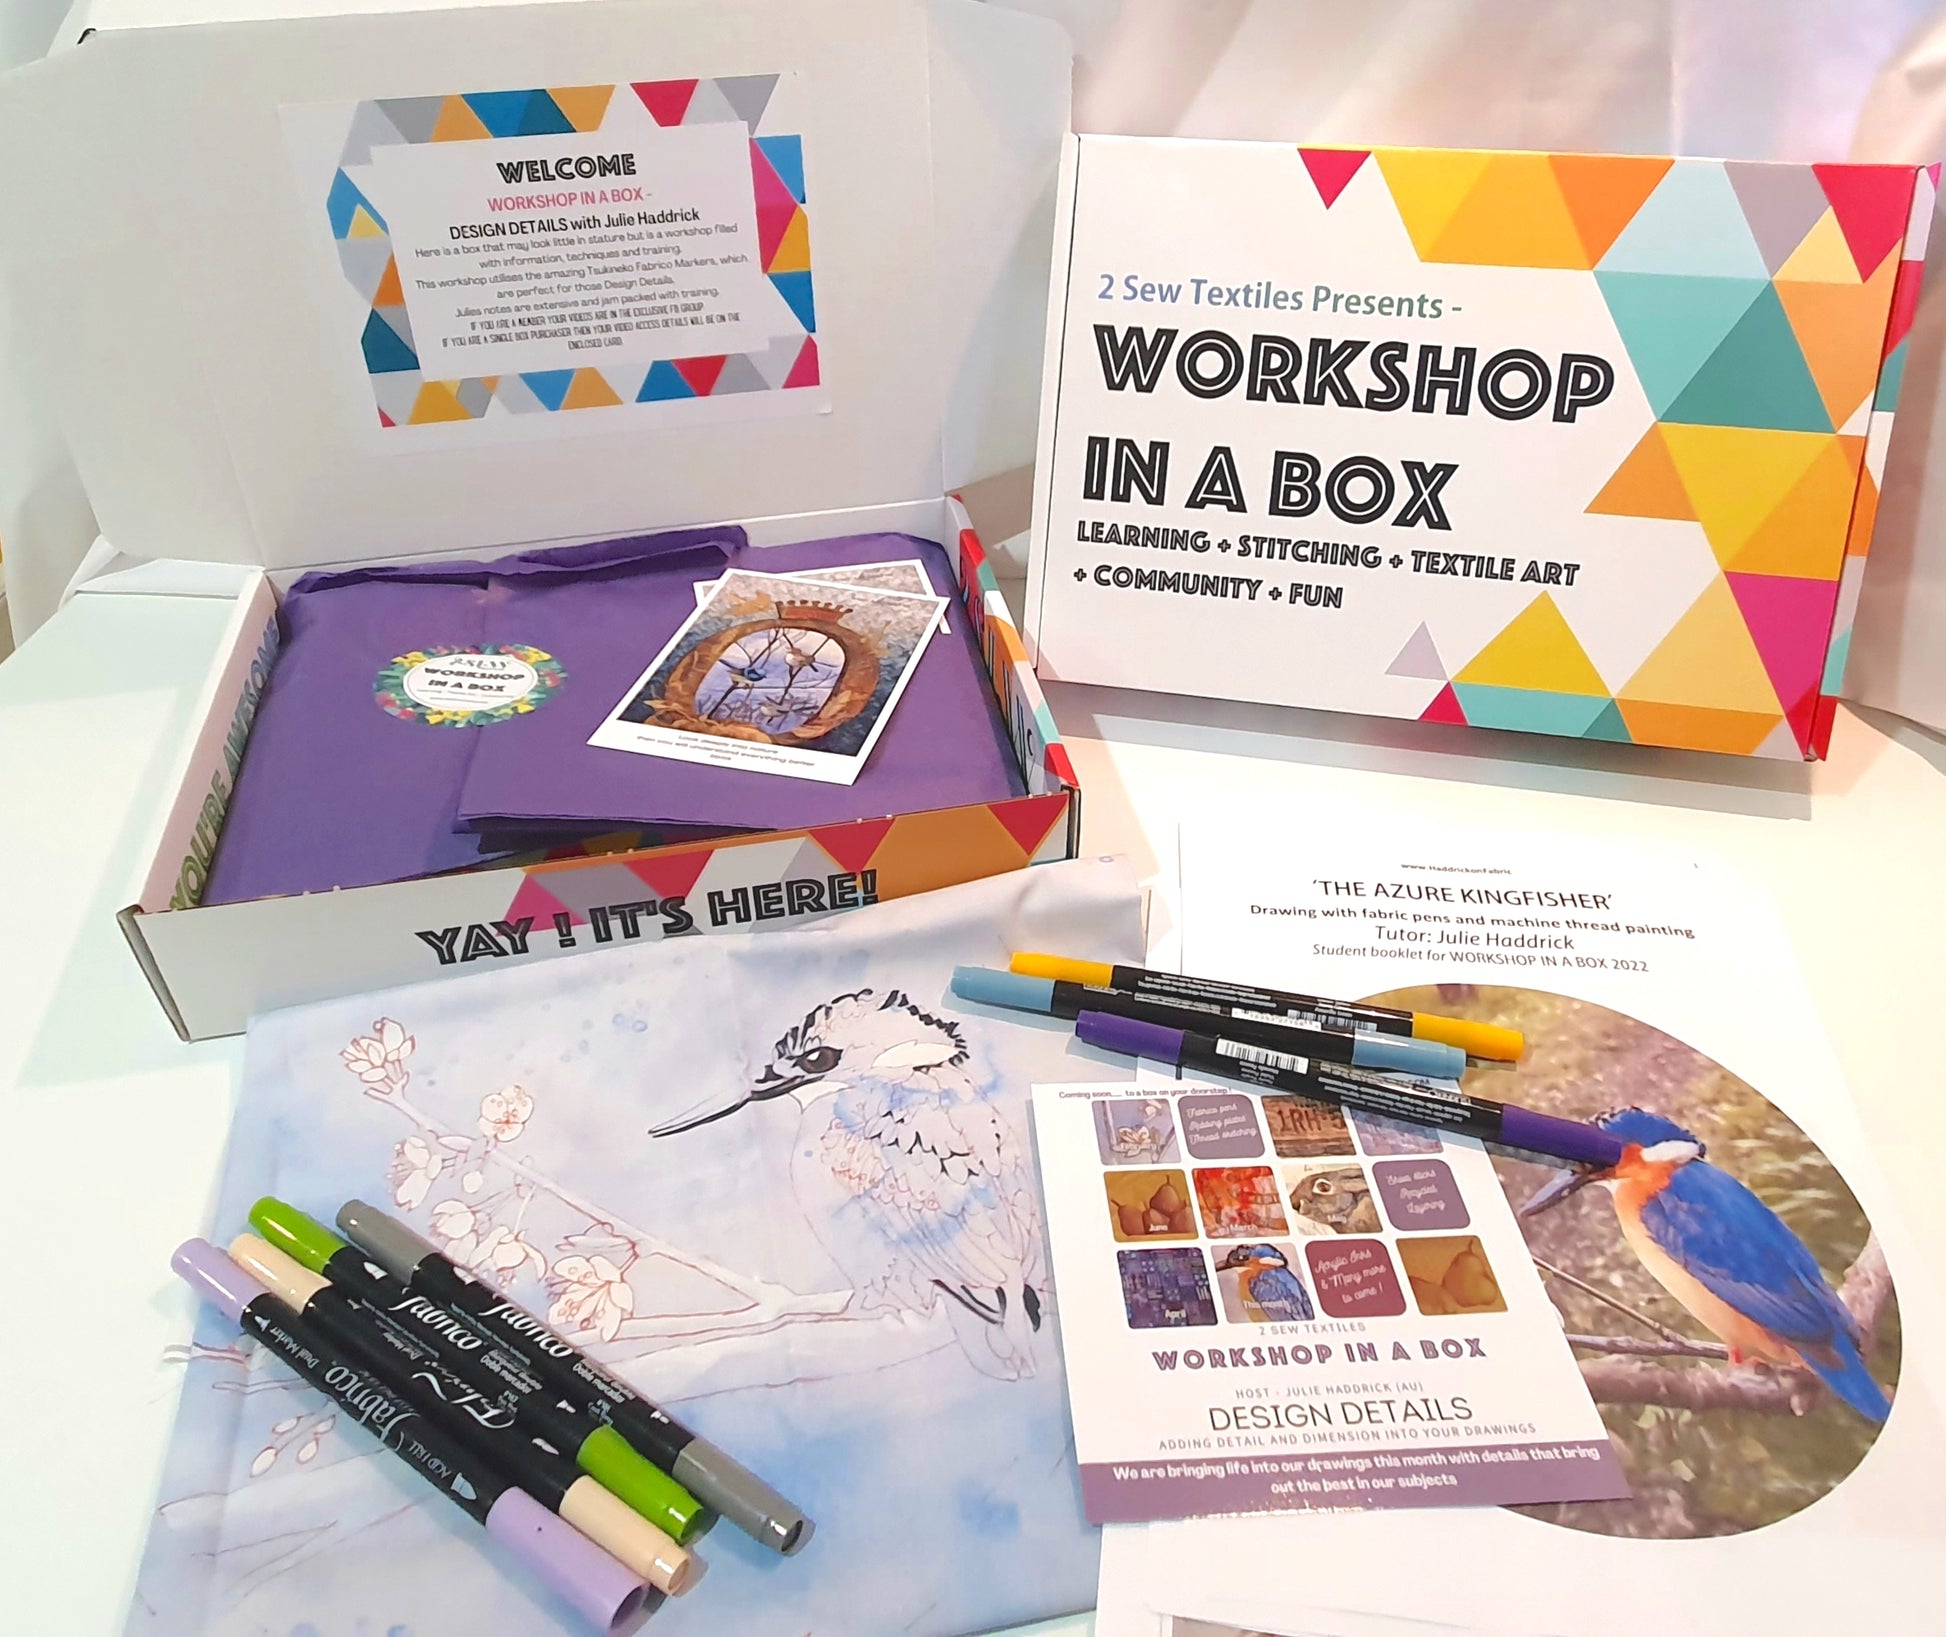 Workshop in a box showing contents with Julie Haddrick